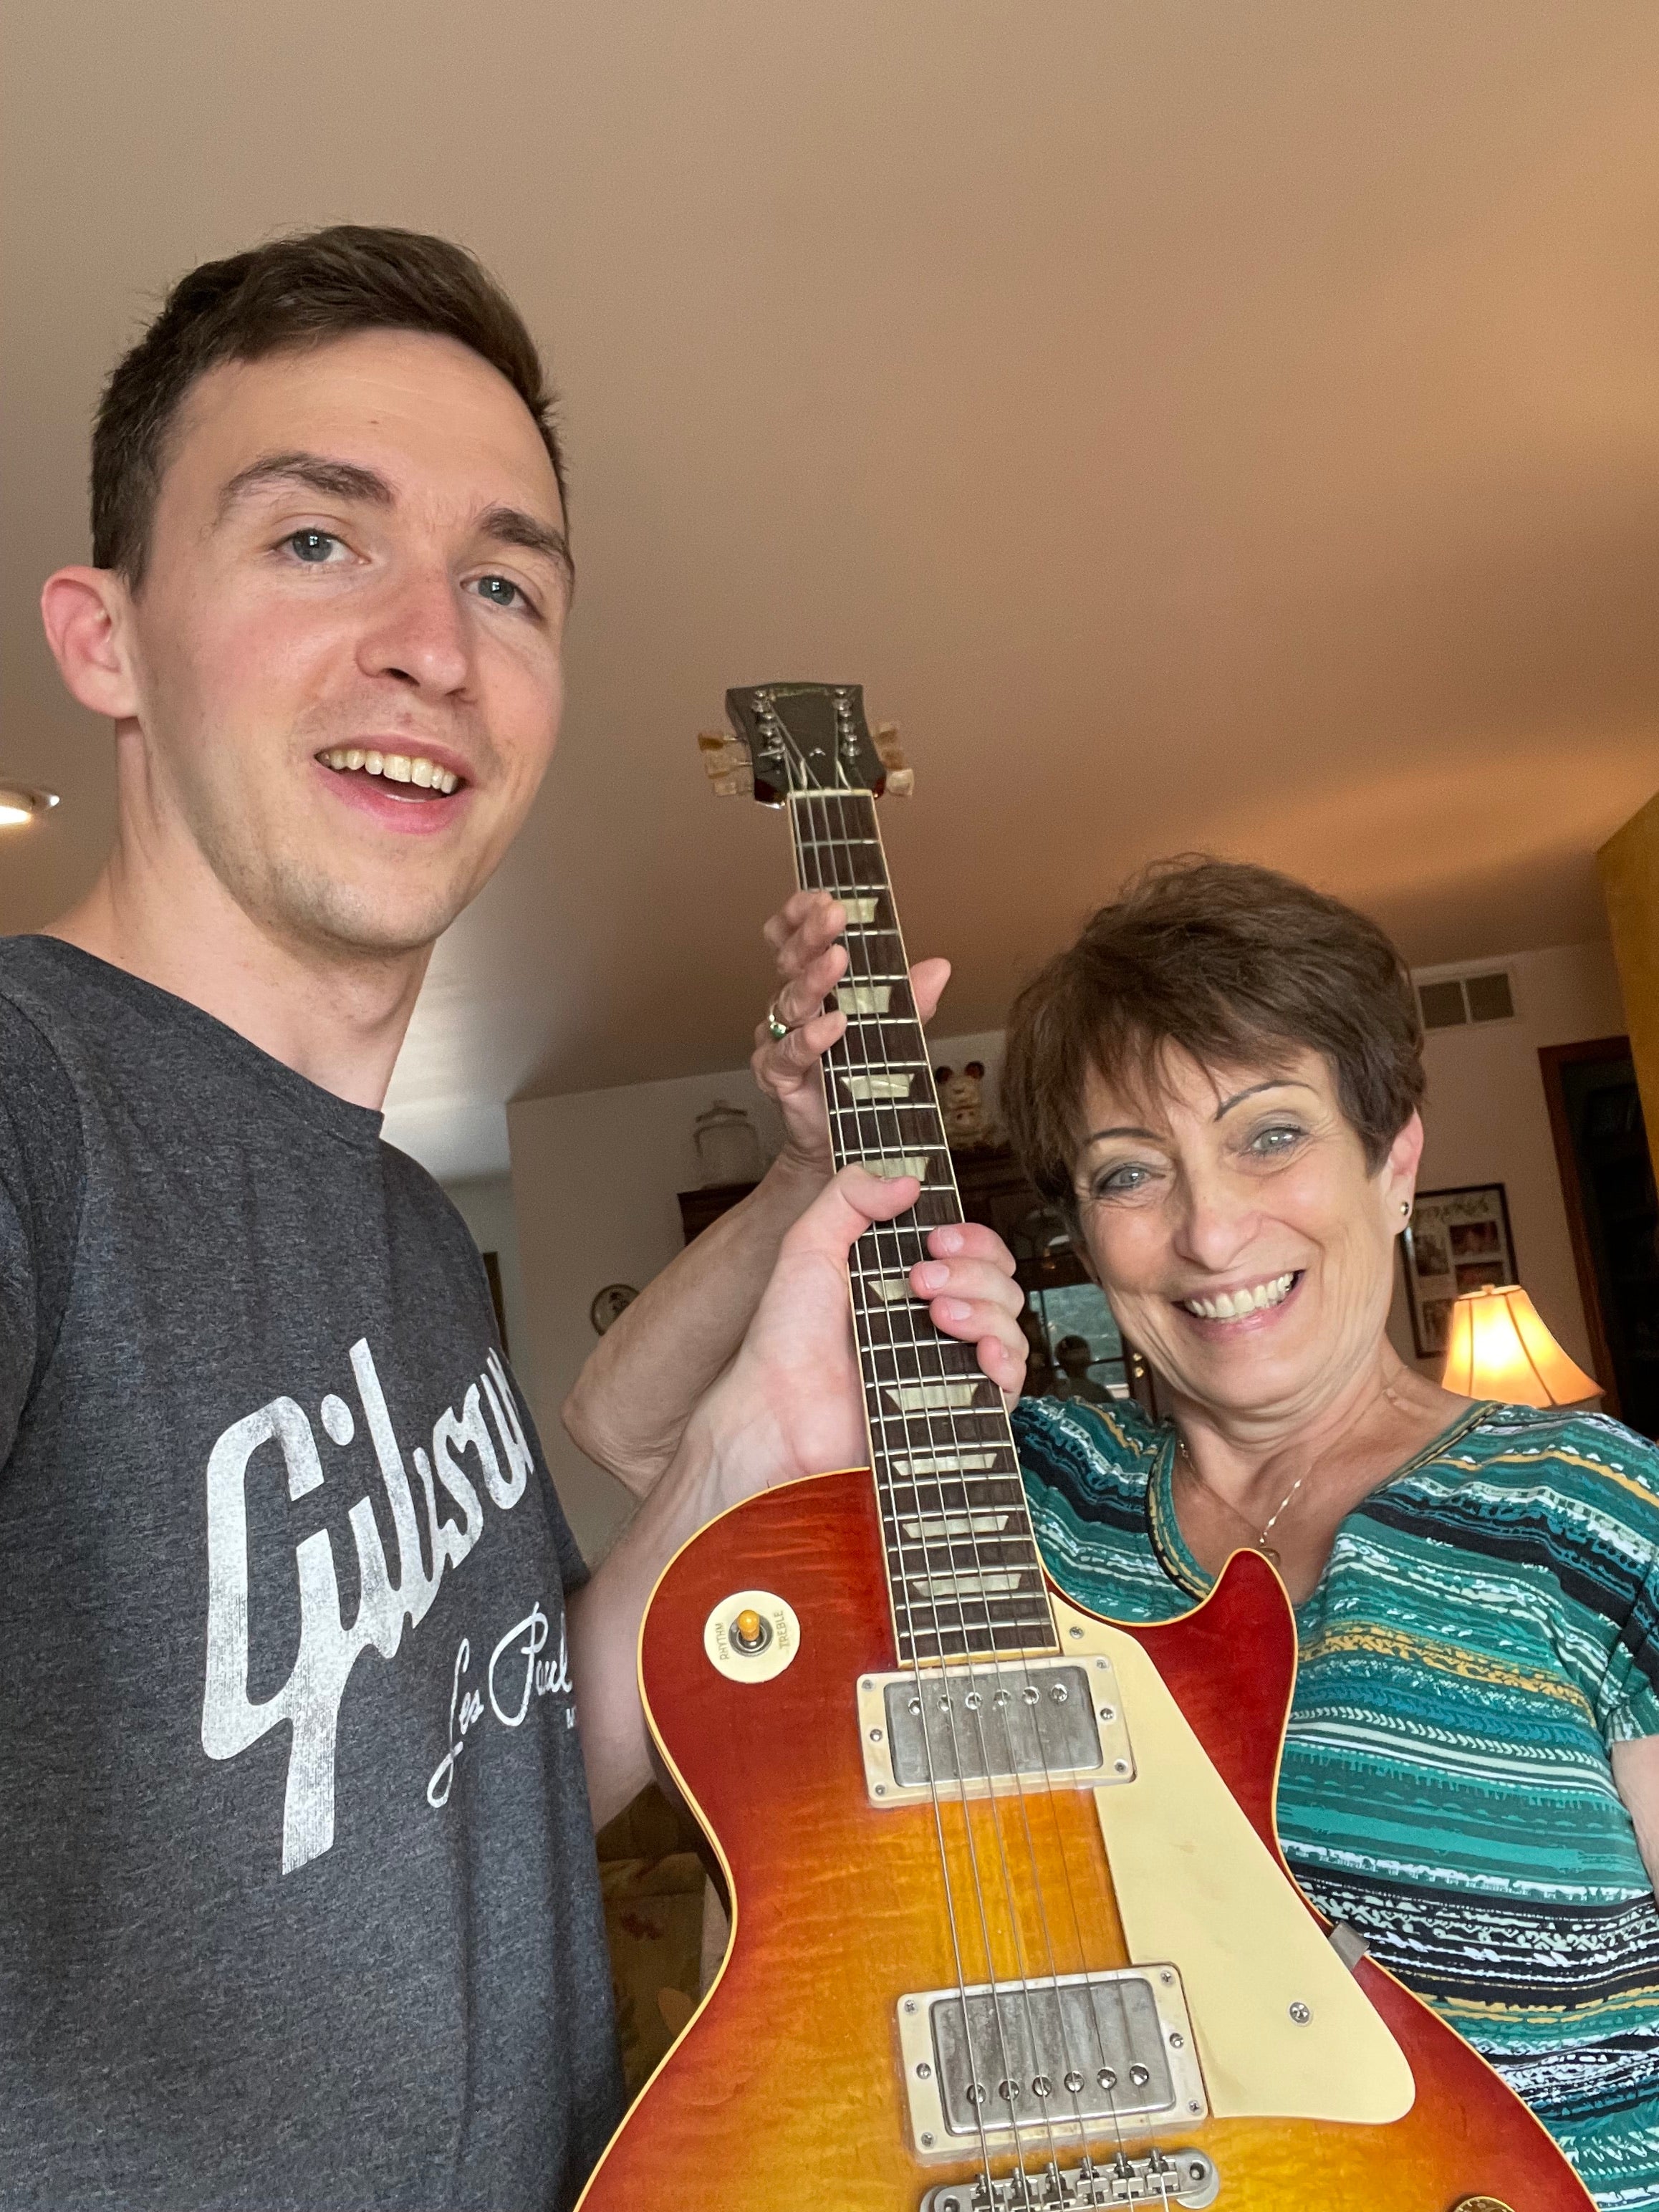 Gibson Les Paul guitar collector buys 1960 Gibson Les Paul